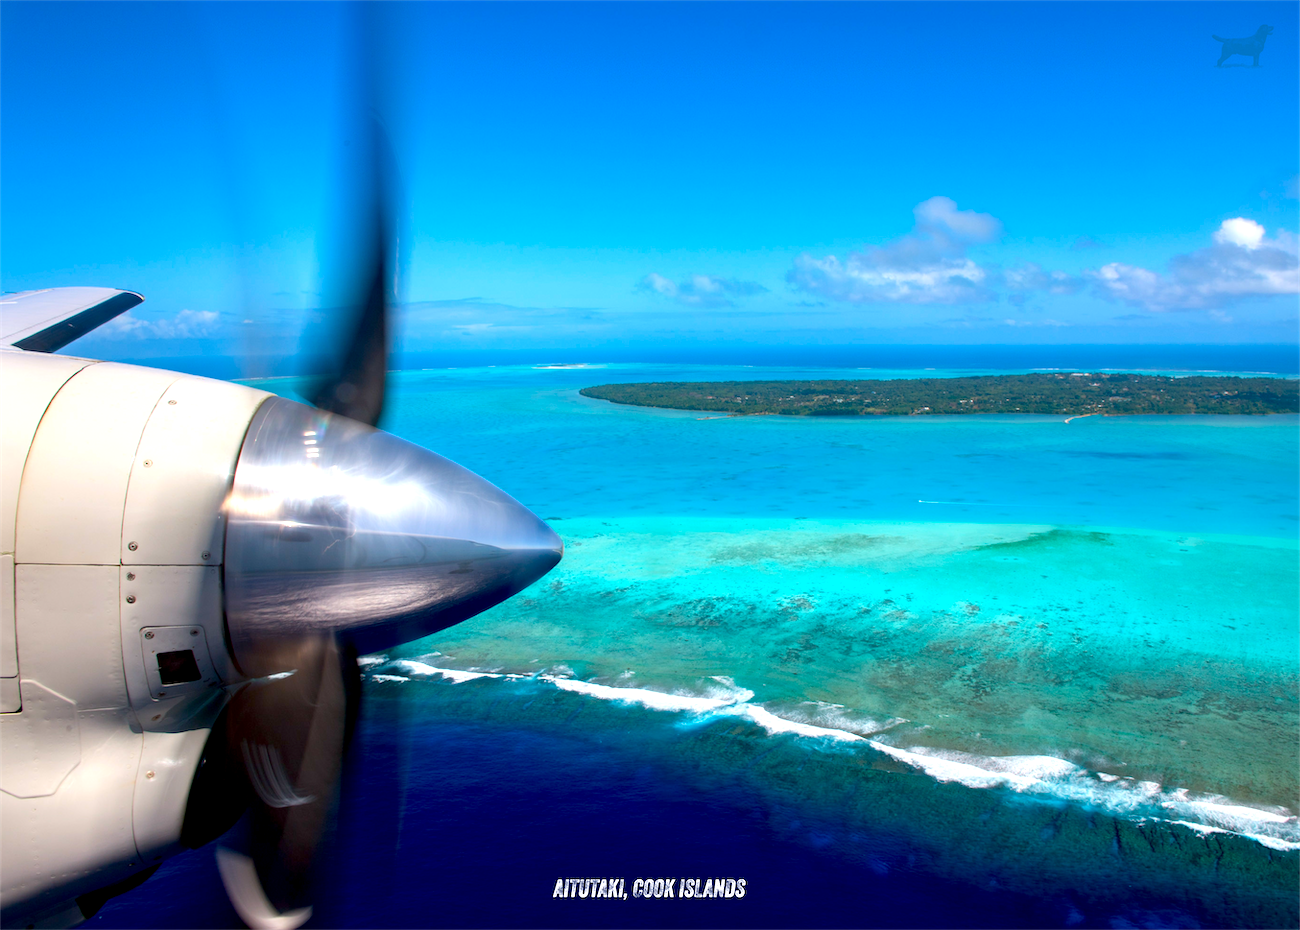 Aitutaki Cook Islands Isolation Outfitters New Zealand